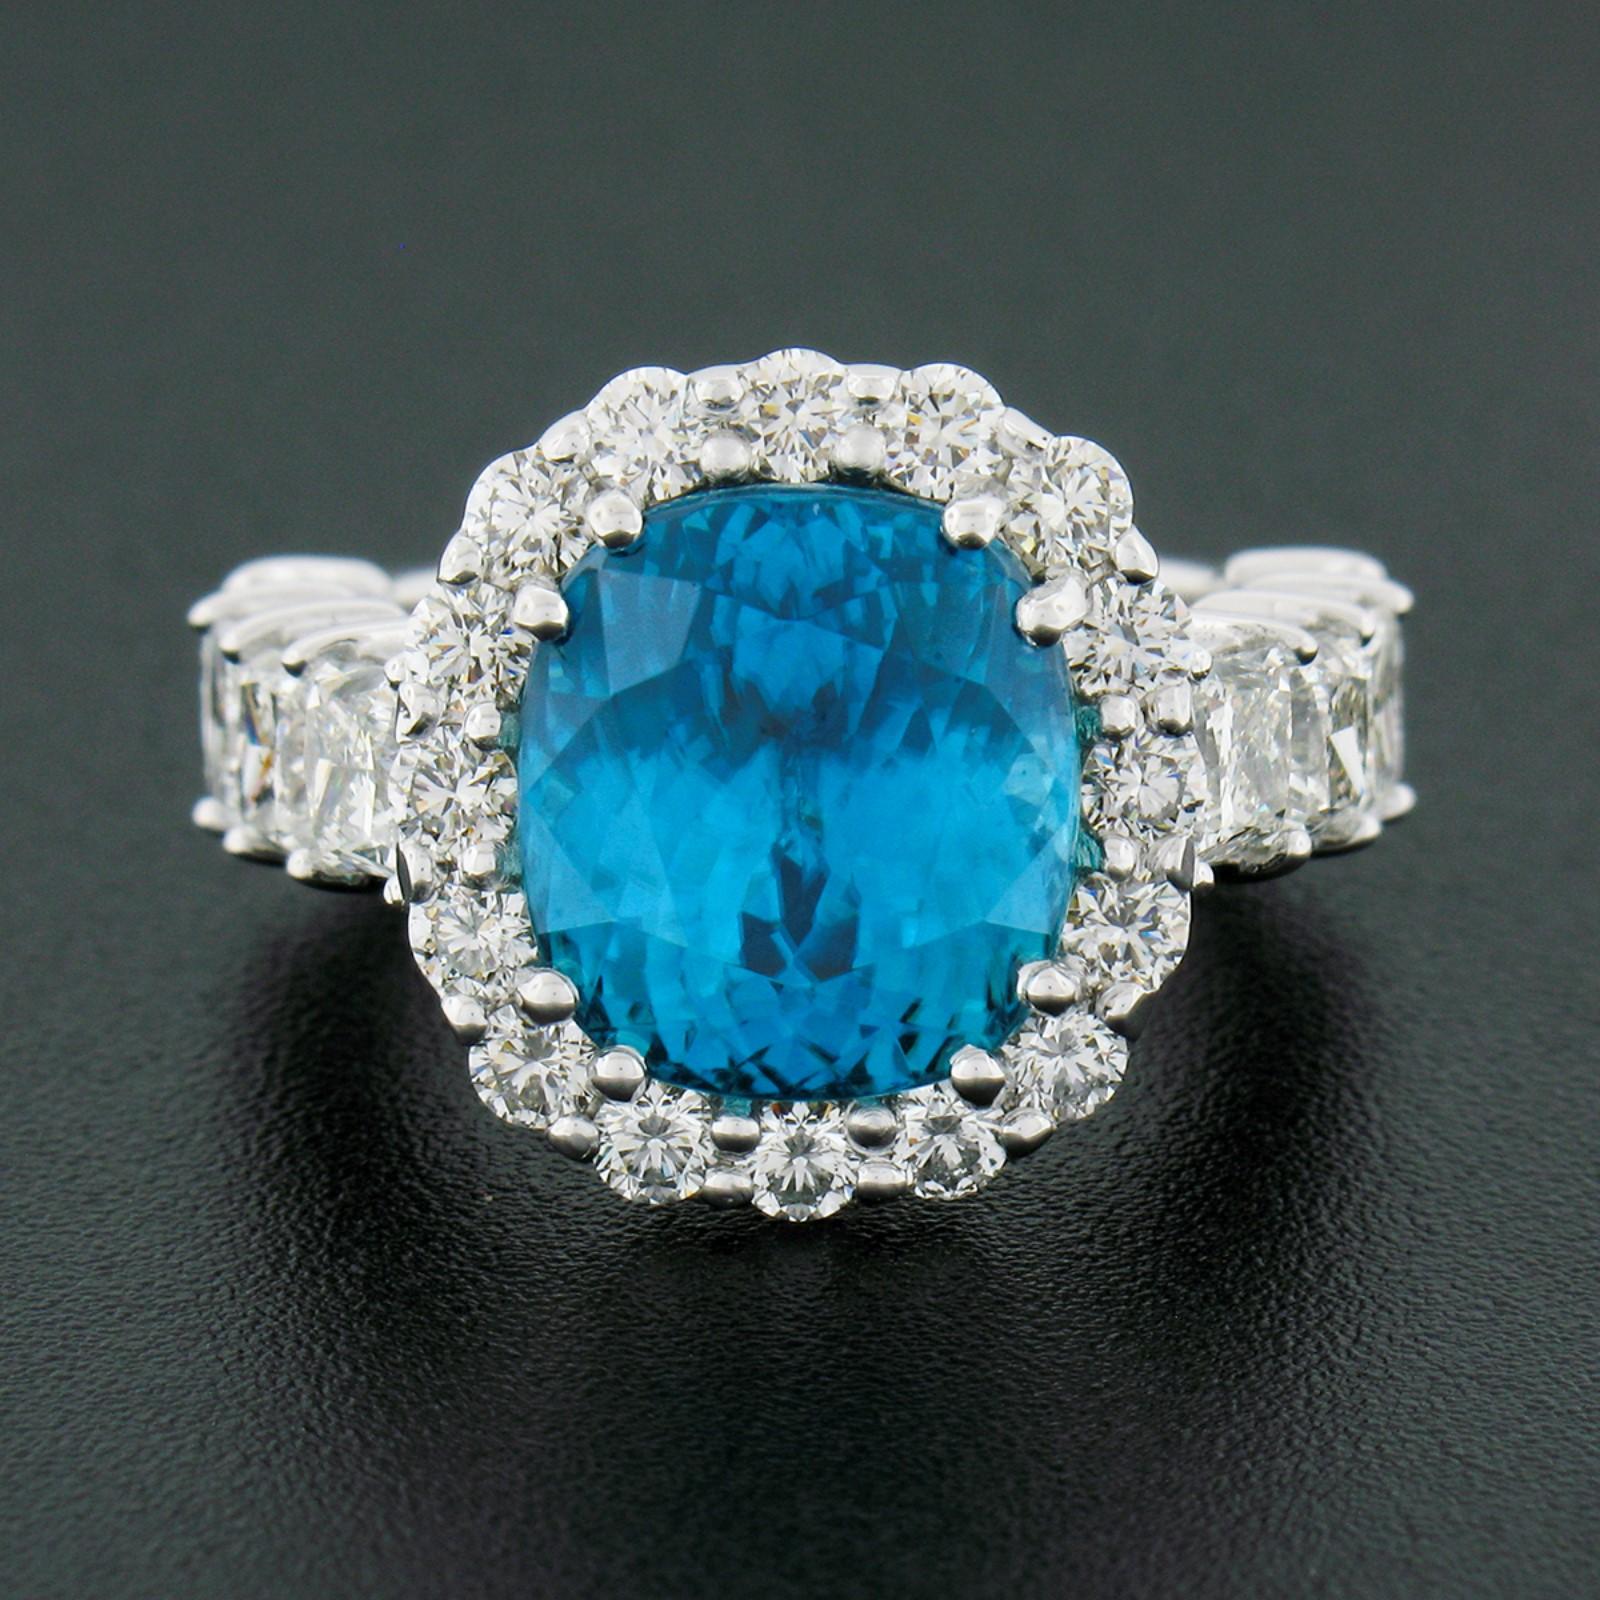 Platinum GIA 16.53ctw Large Cushion Blue Zircon Diamond Accents Cocktail Ring In Excellent Condition For Sale In Montclair, NJ